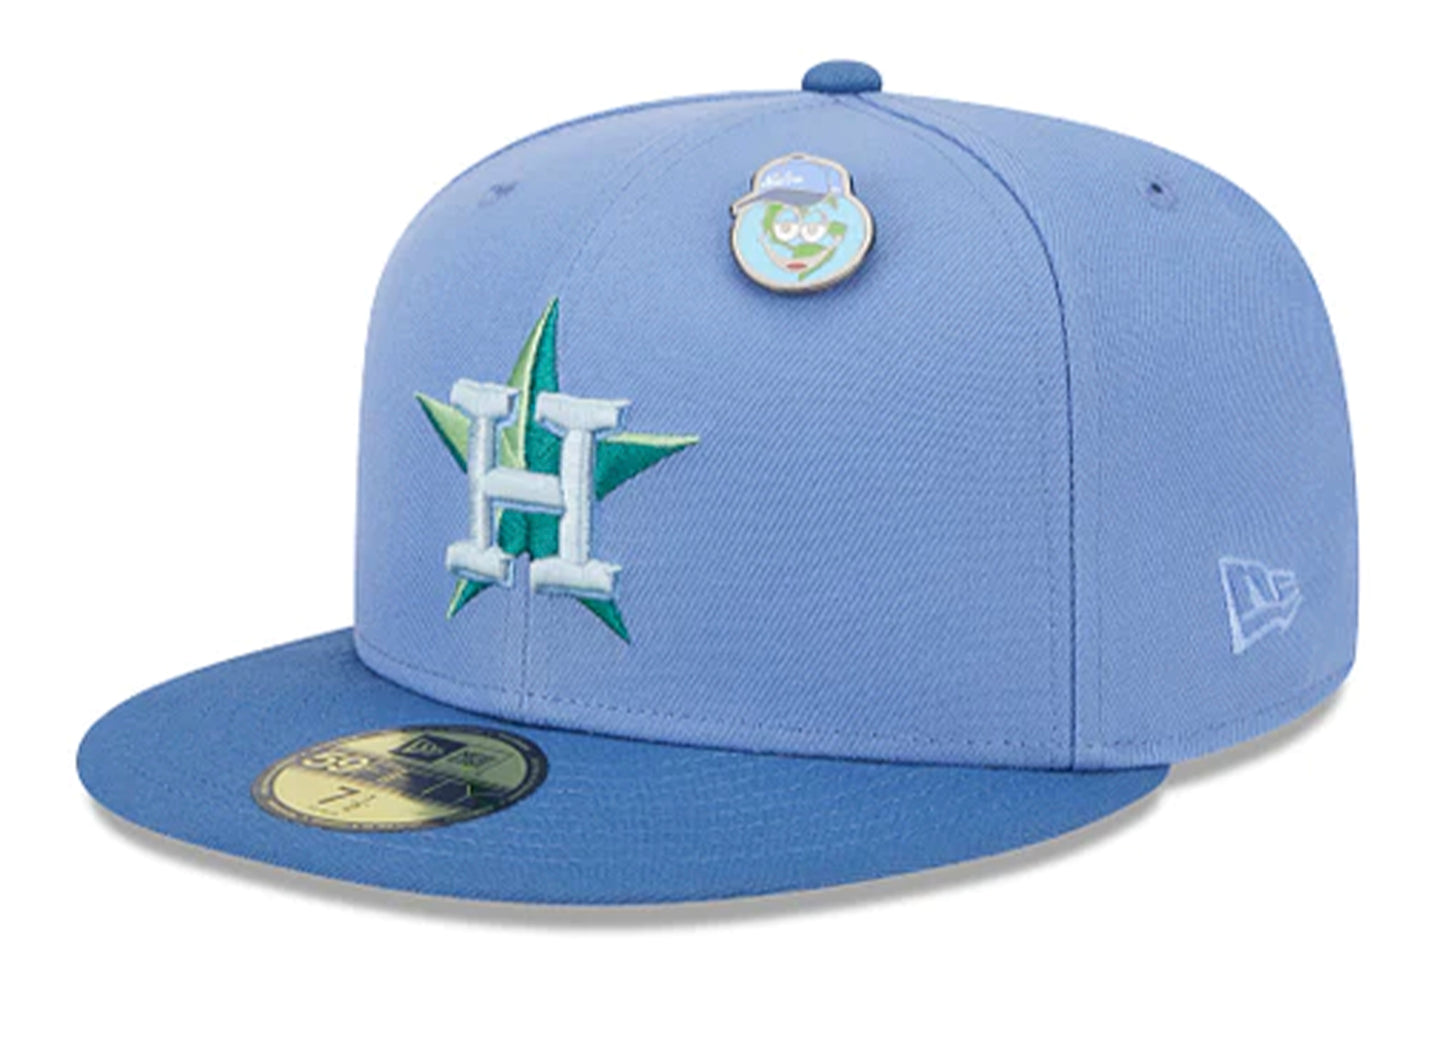 New Era Outer Space Houston Astros Hat